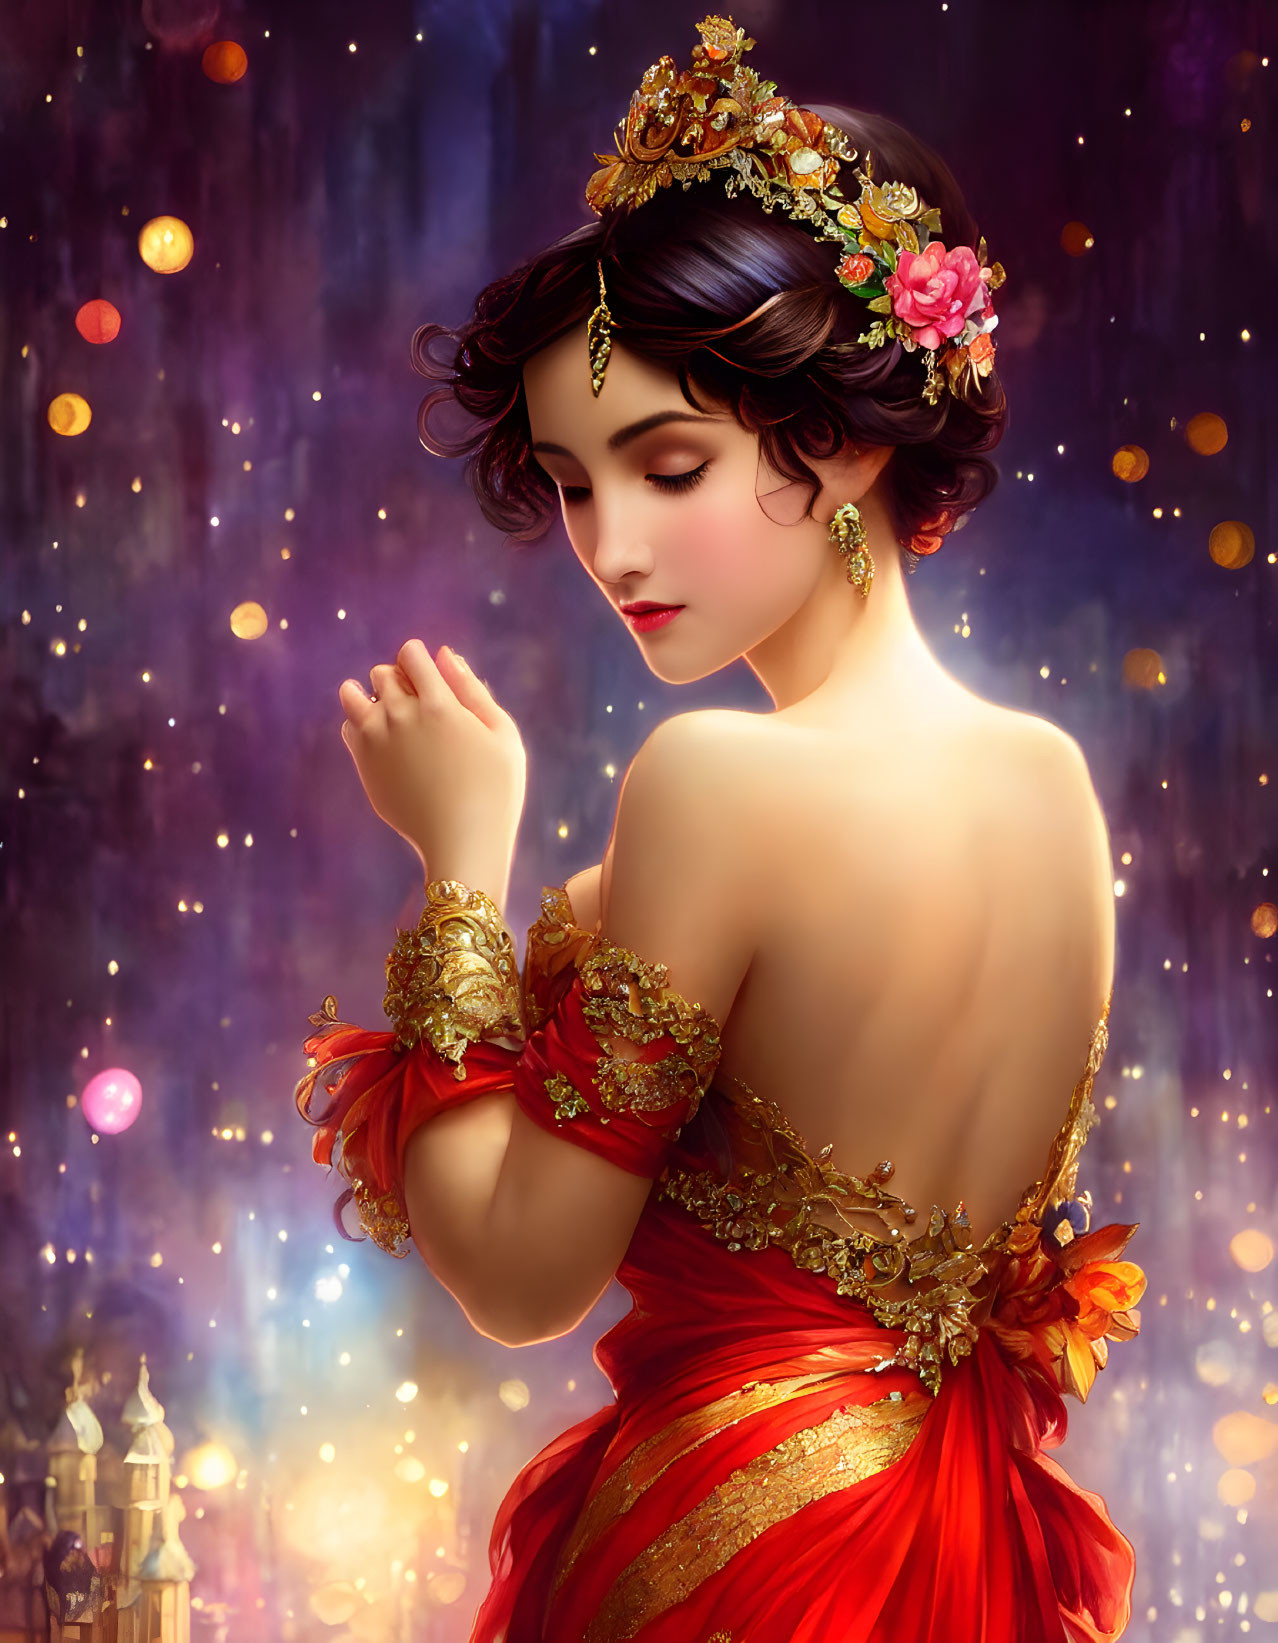 Ethereal woman in red dress with floral crown against bokeh backdrop